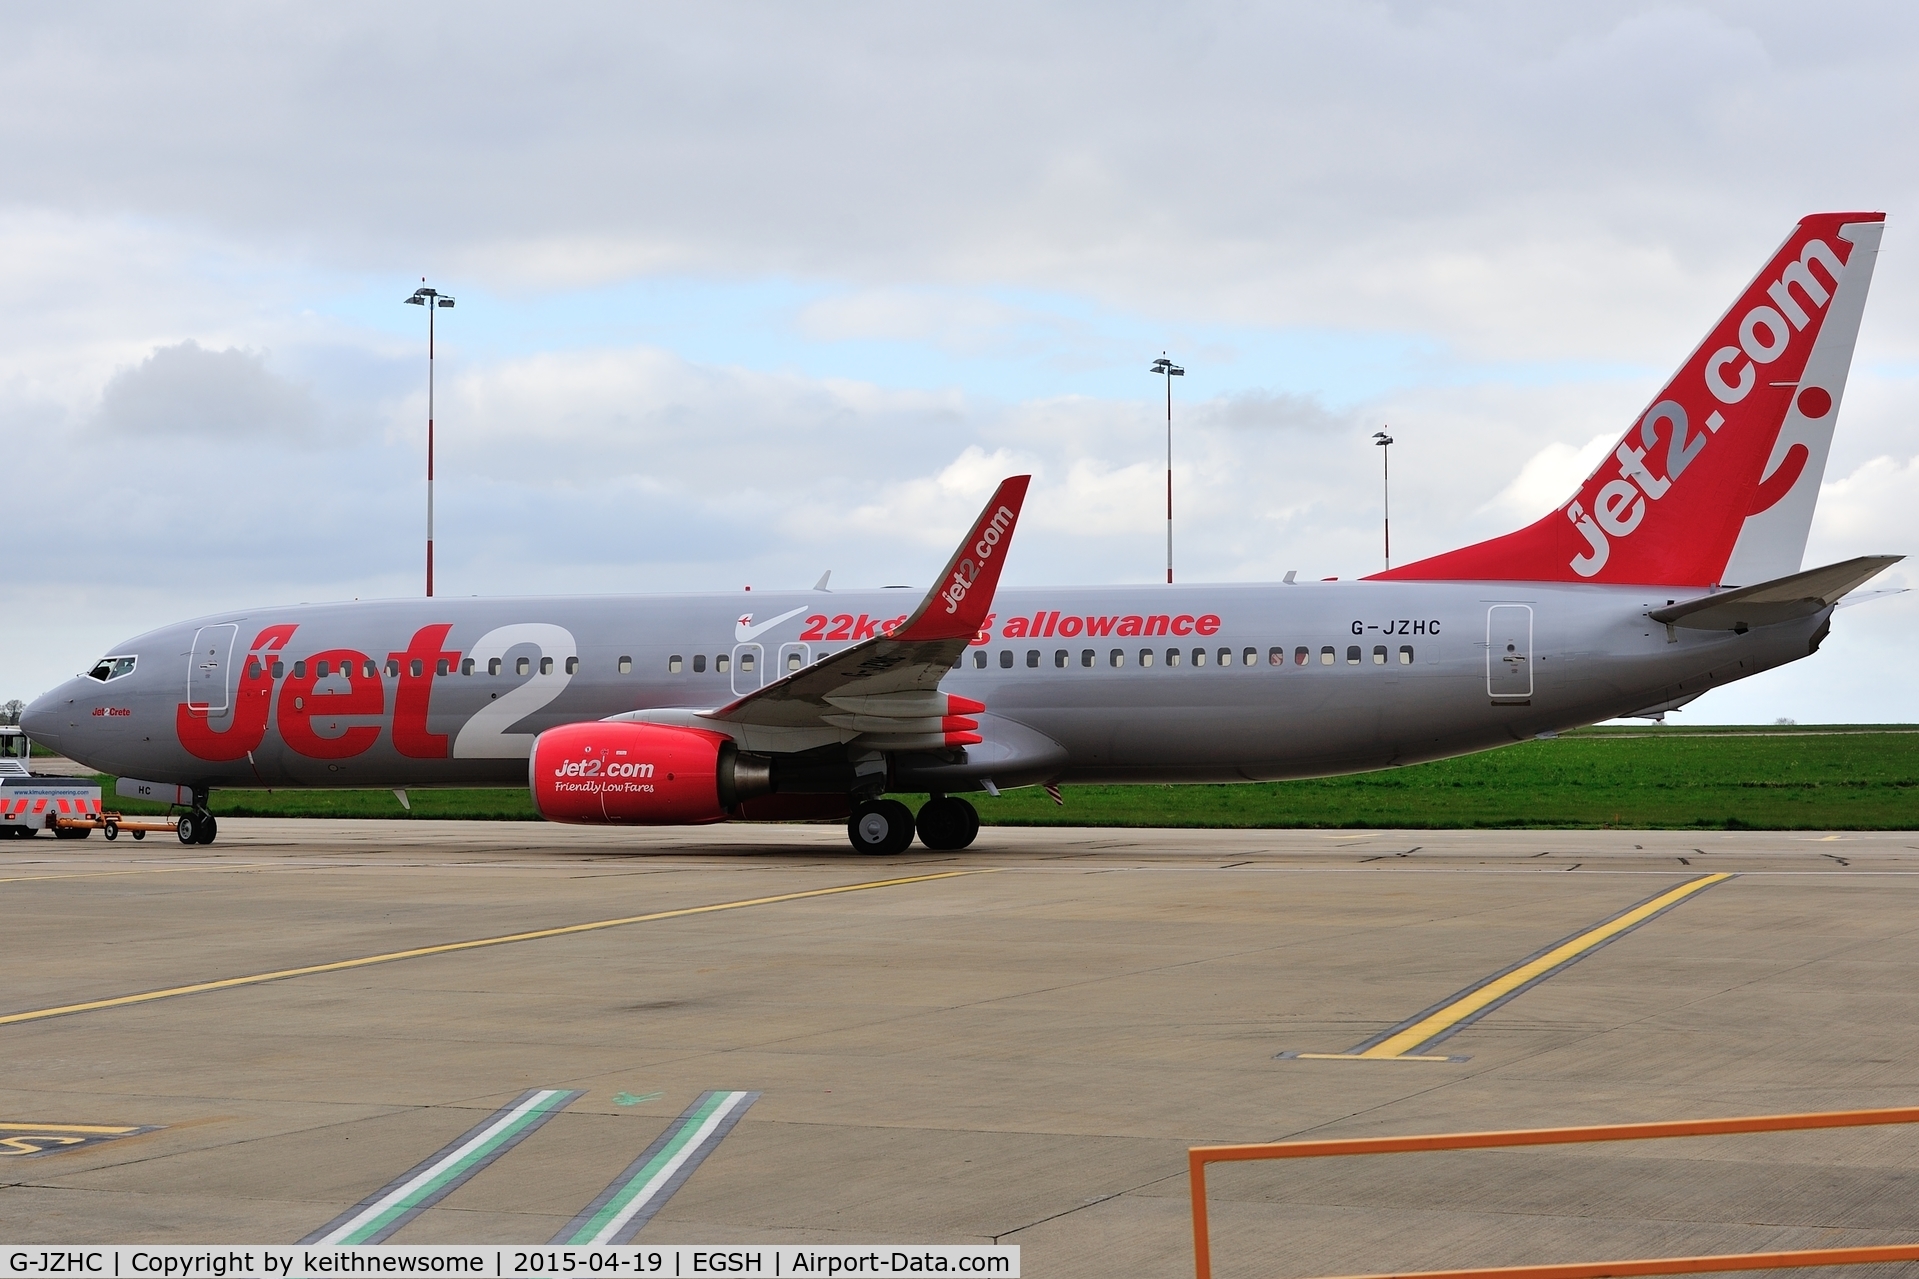 G-JZHC, 2000 Boeing 737-8K5 C/N 30593, Arrived at Norwich for maintenance.